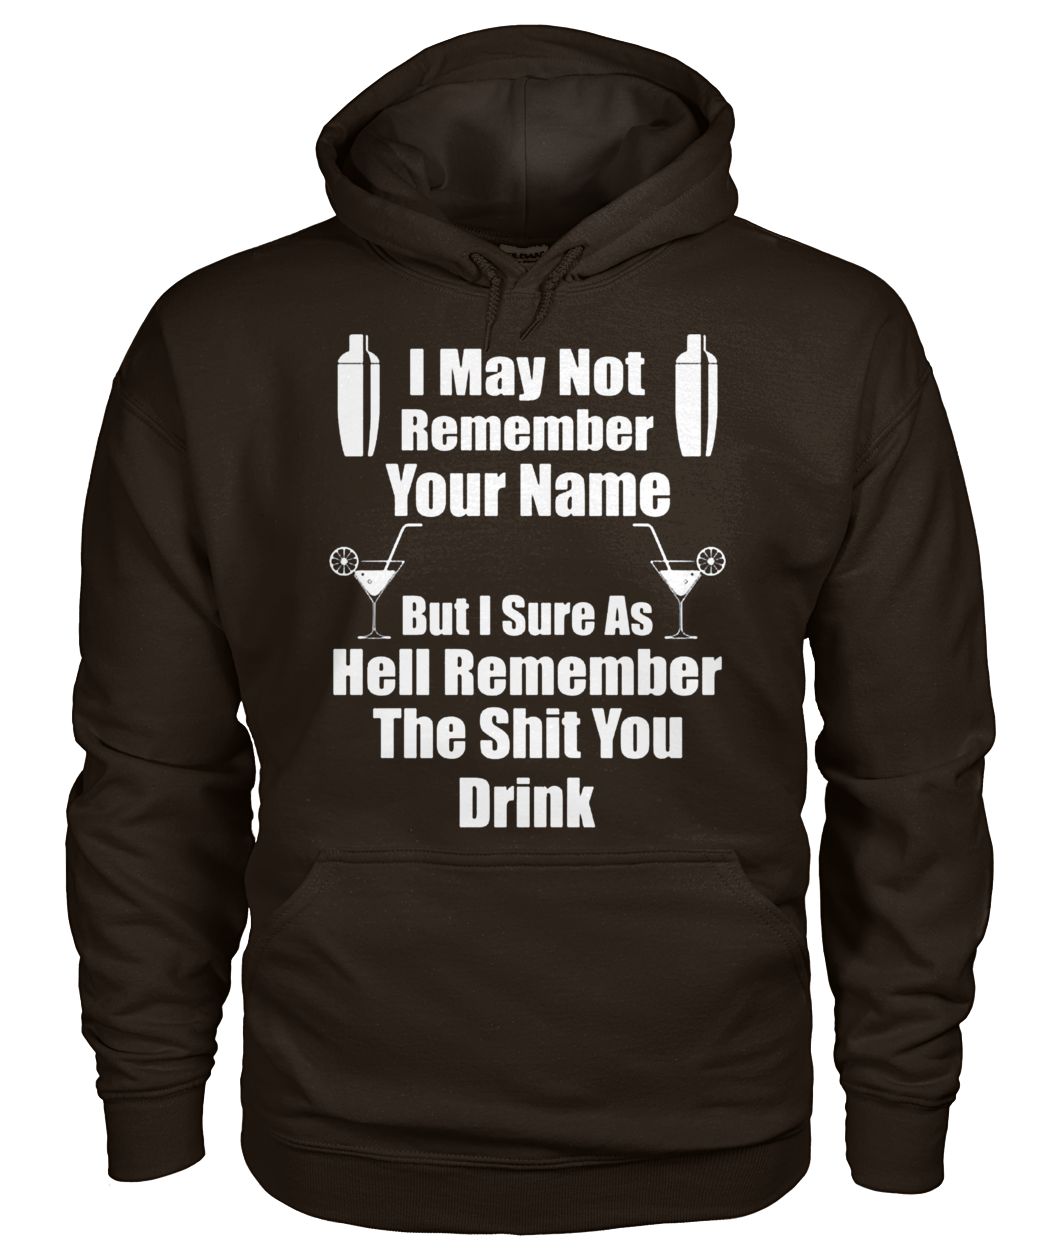 I may not remember your name but I sure as hell remember the shit you drink gildan hoodie